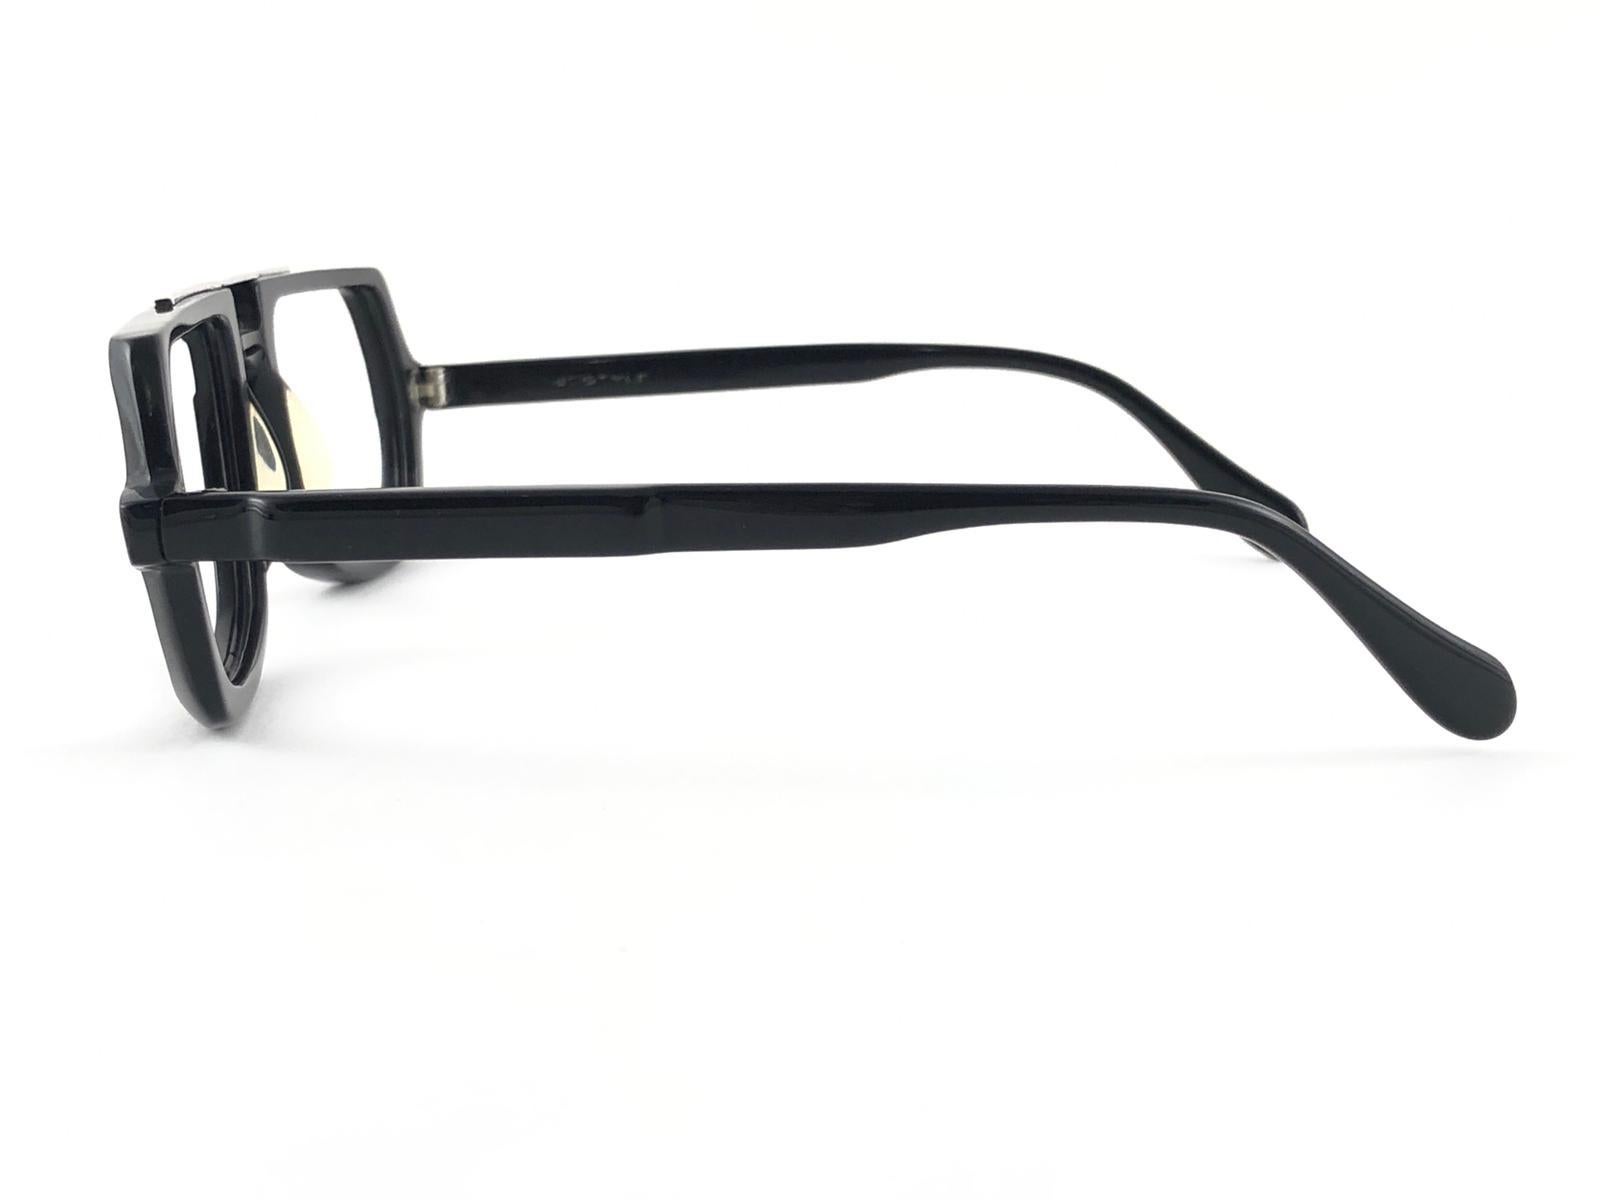 New Vintage Neostyle small sleek black frame ready for your prescription lenses.

Made in Germany.
 
Produced and design in 1990's.

This item may show minor sign of wear due to storage.


FRONT : 13.5   CMS

LENS HEIGHT : 5 CMS

LENS WIDTH : 5.5